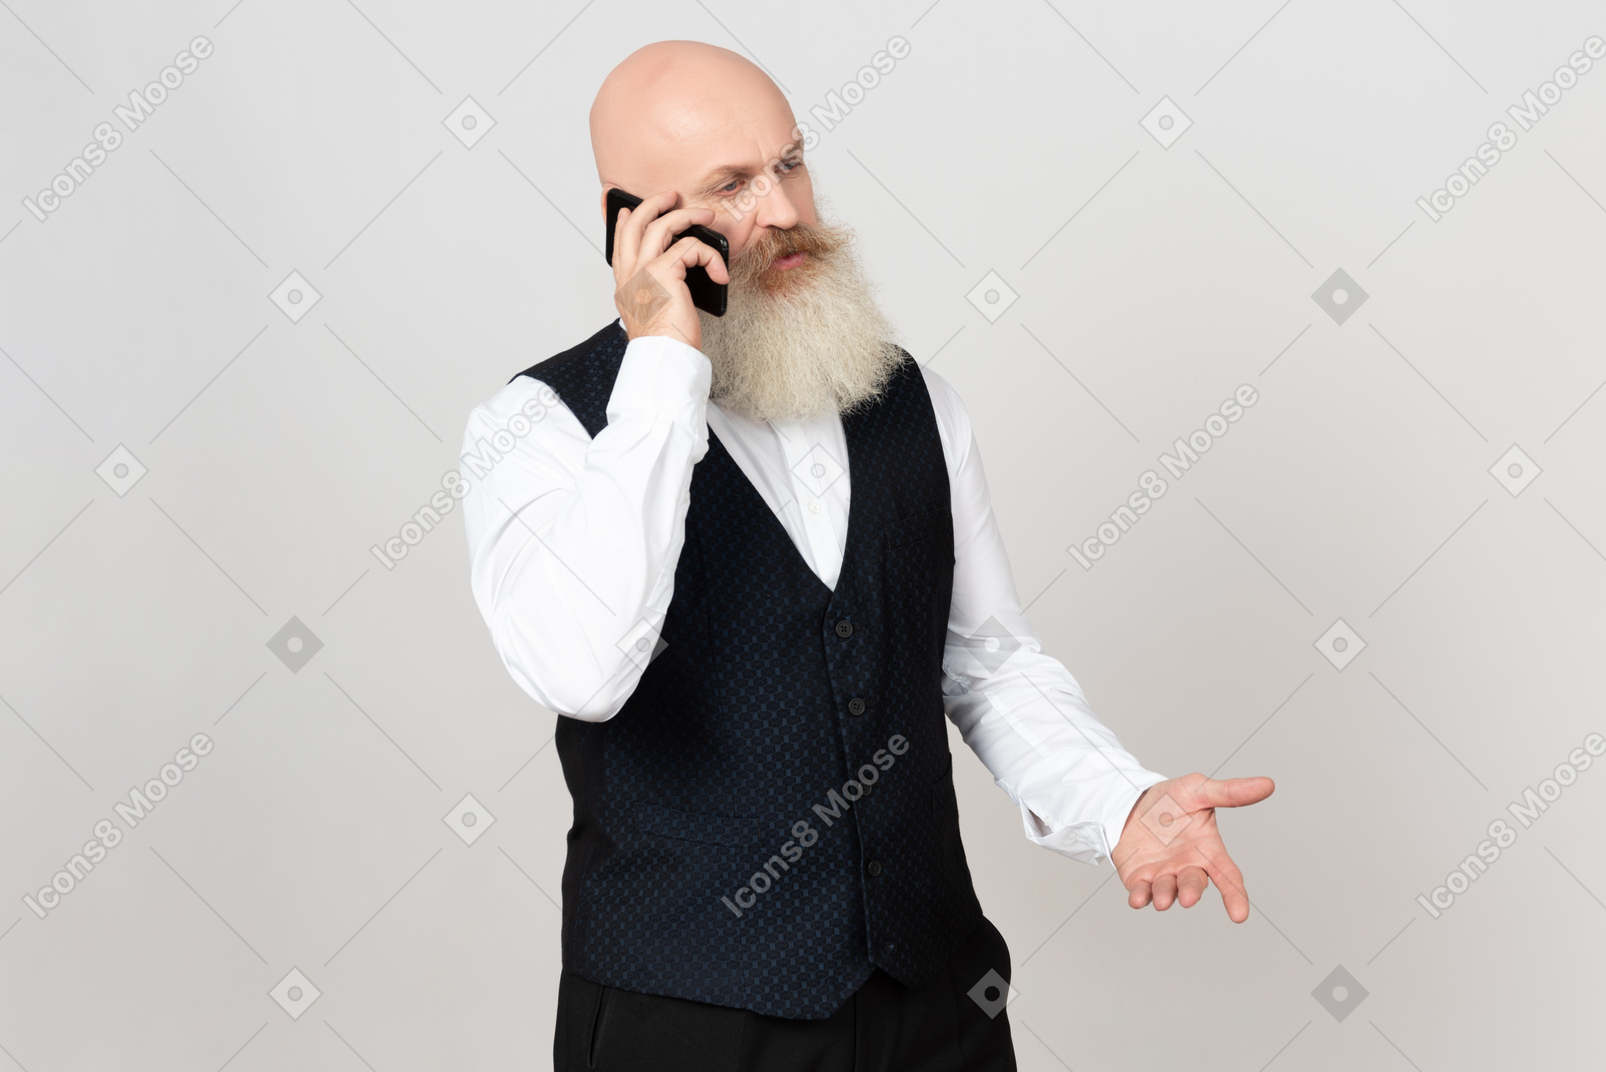 Aged man looks totally involved in phone talk